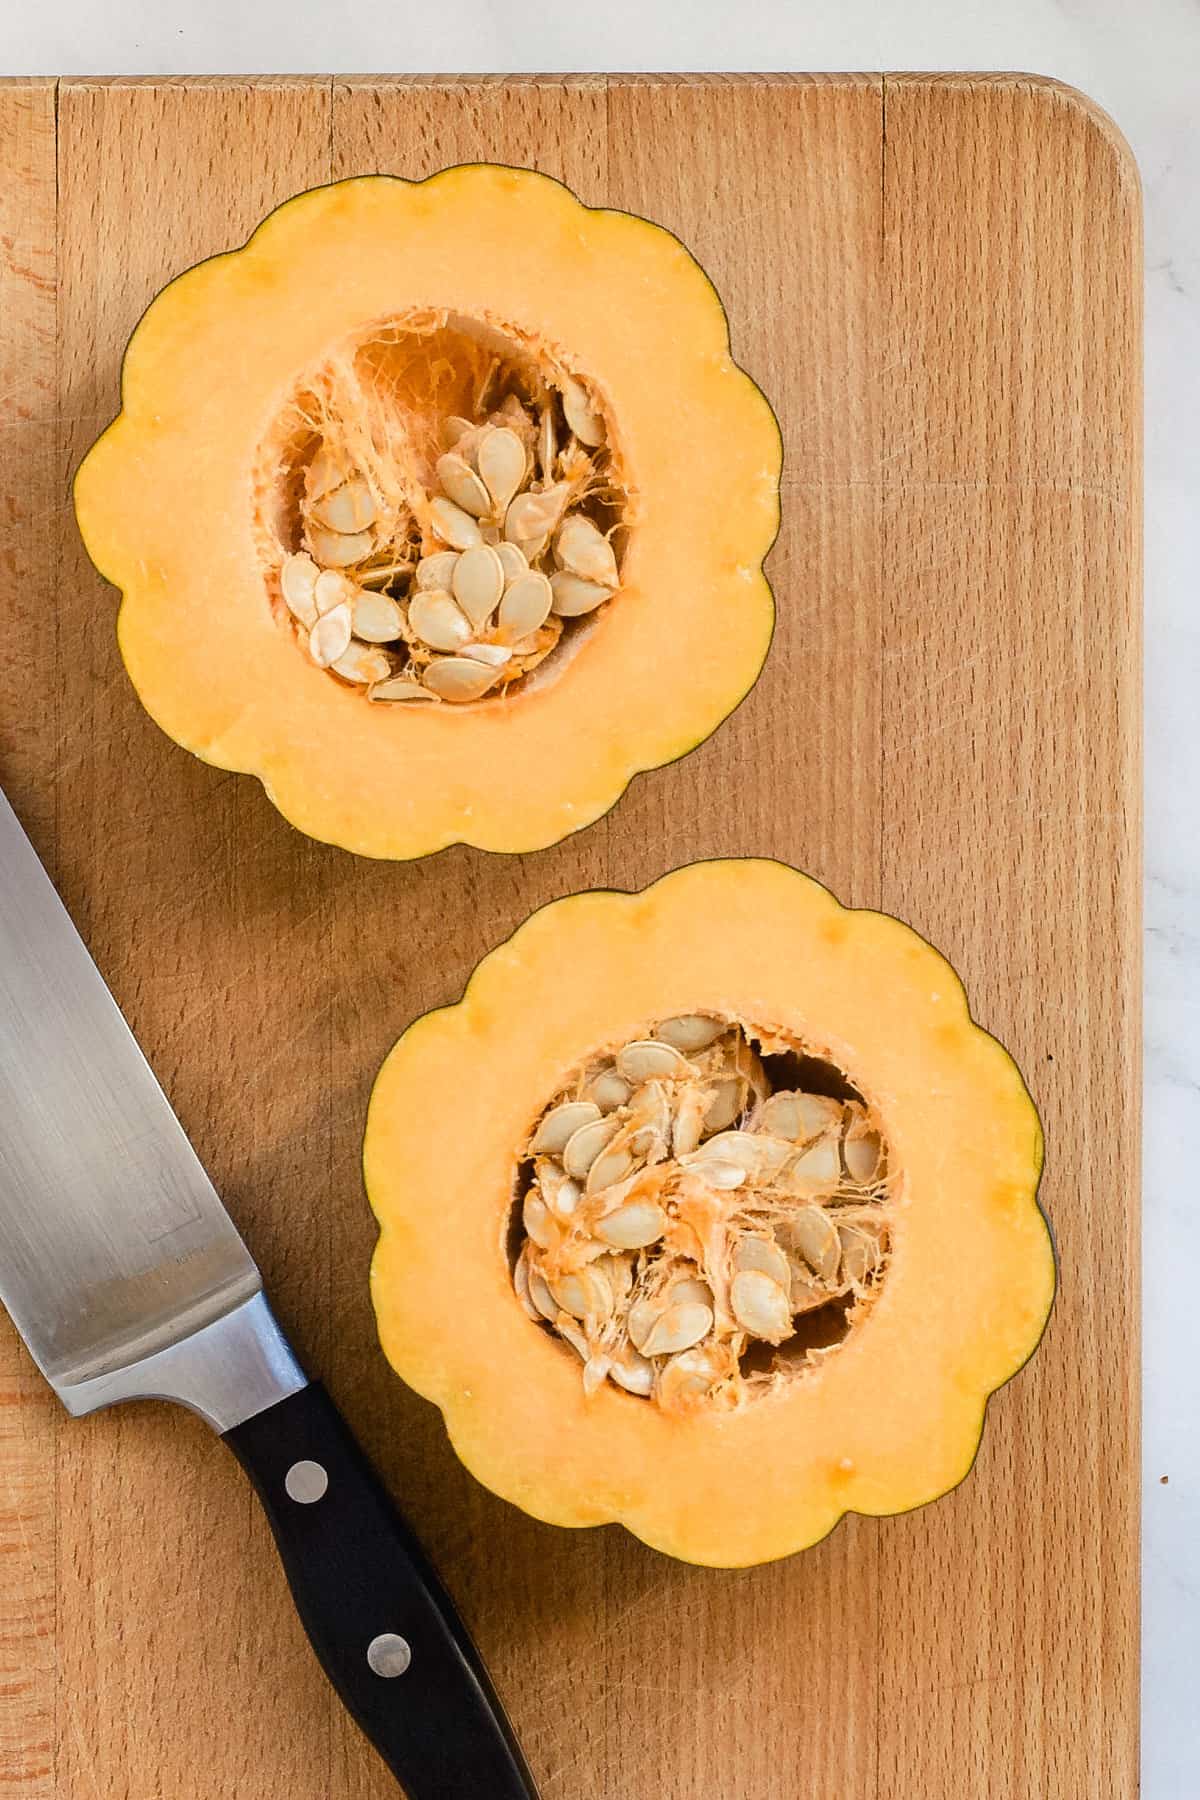 Acorn squash halves on a wooden cutting board with knife